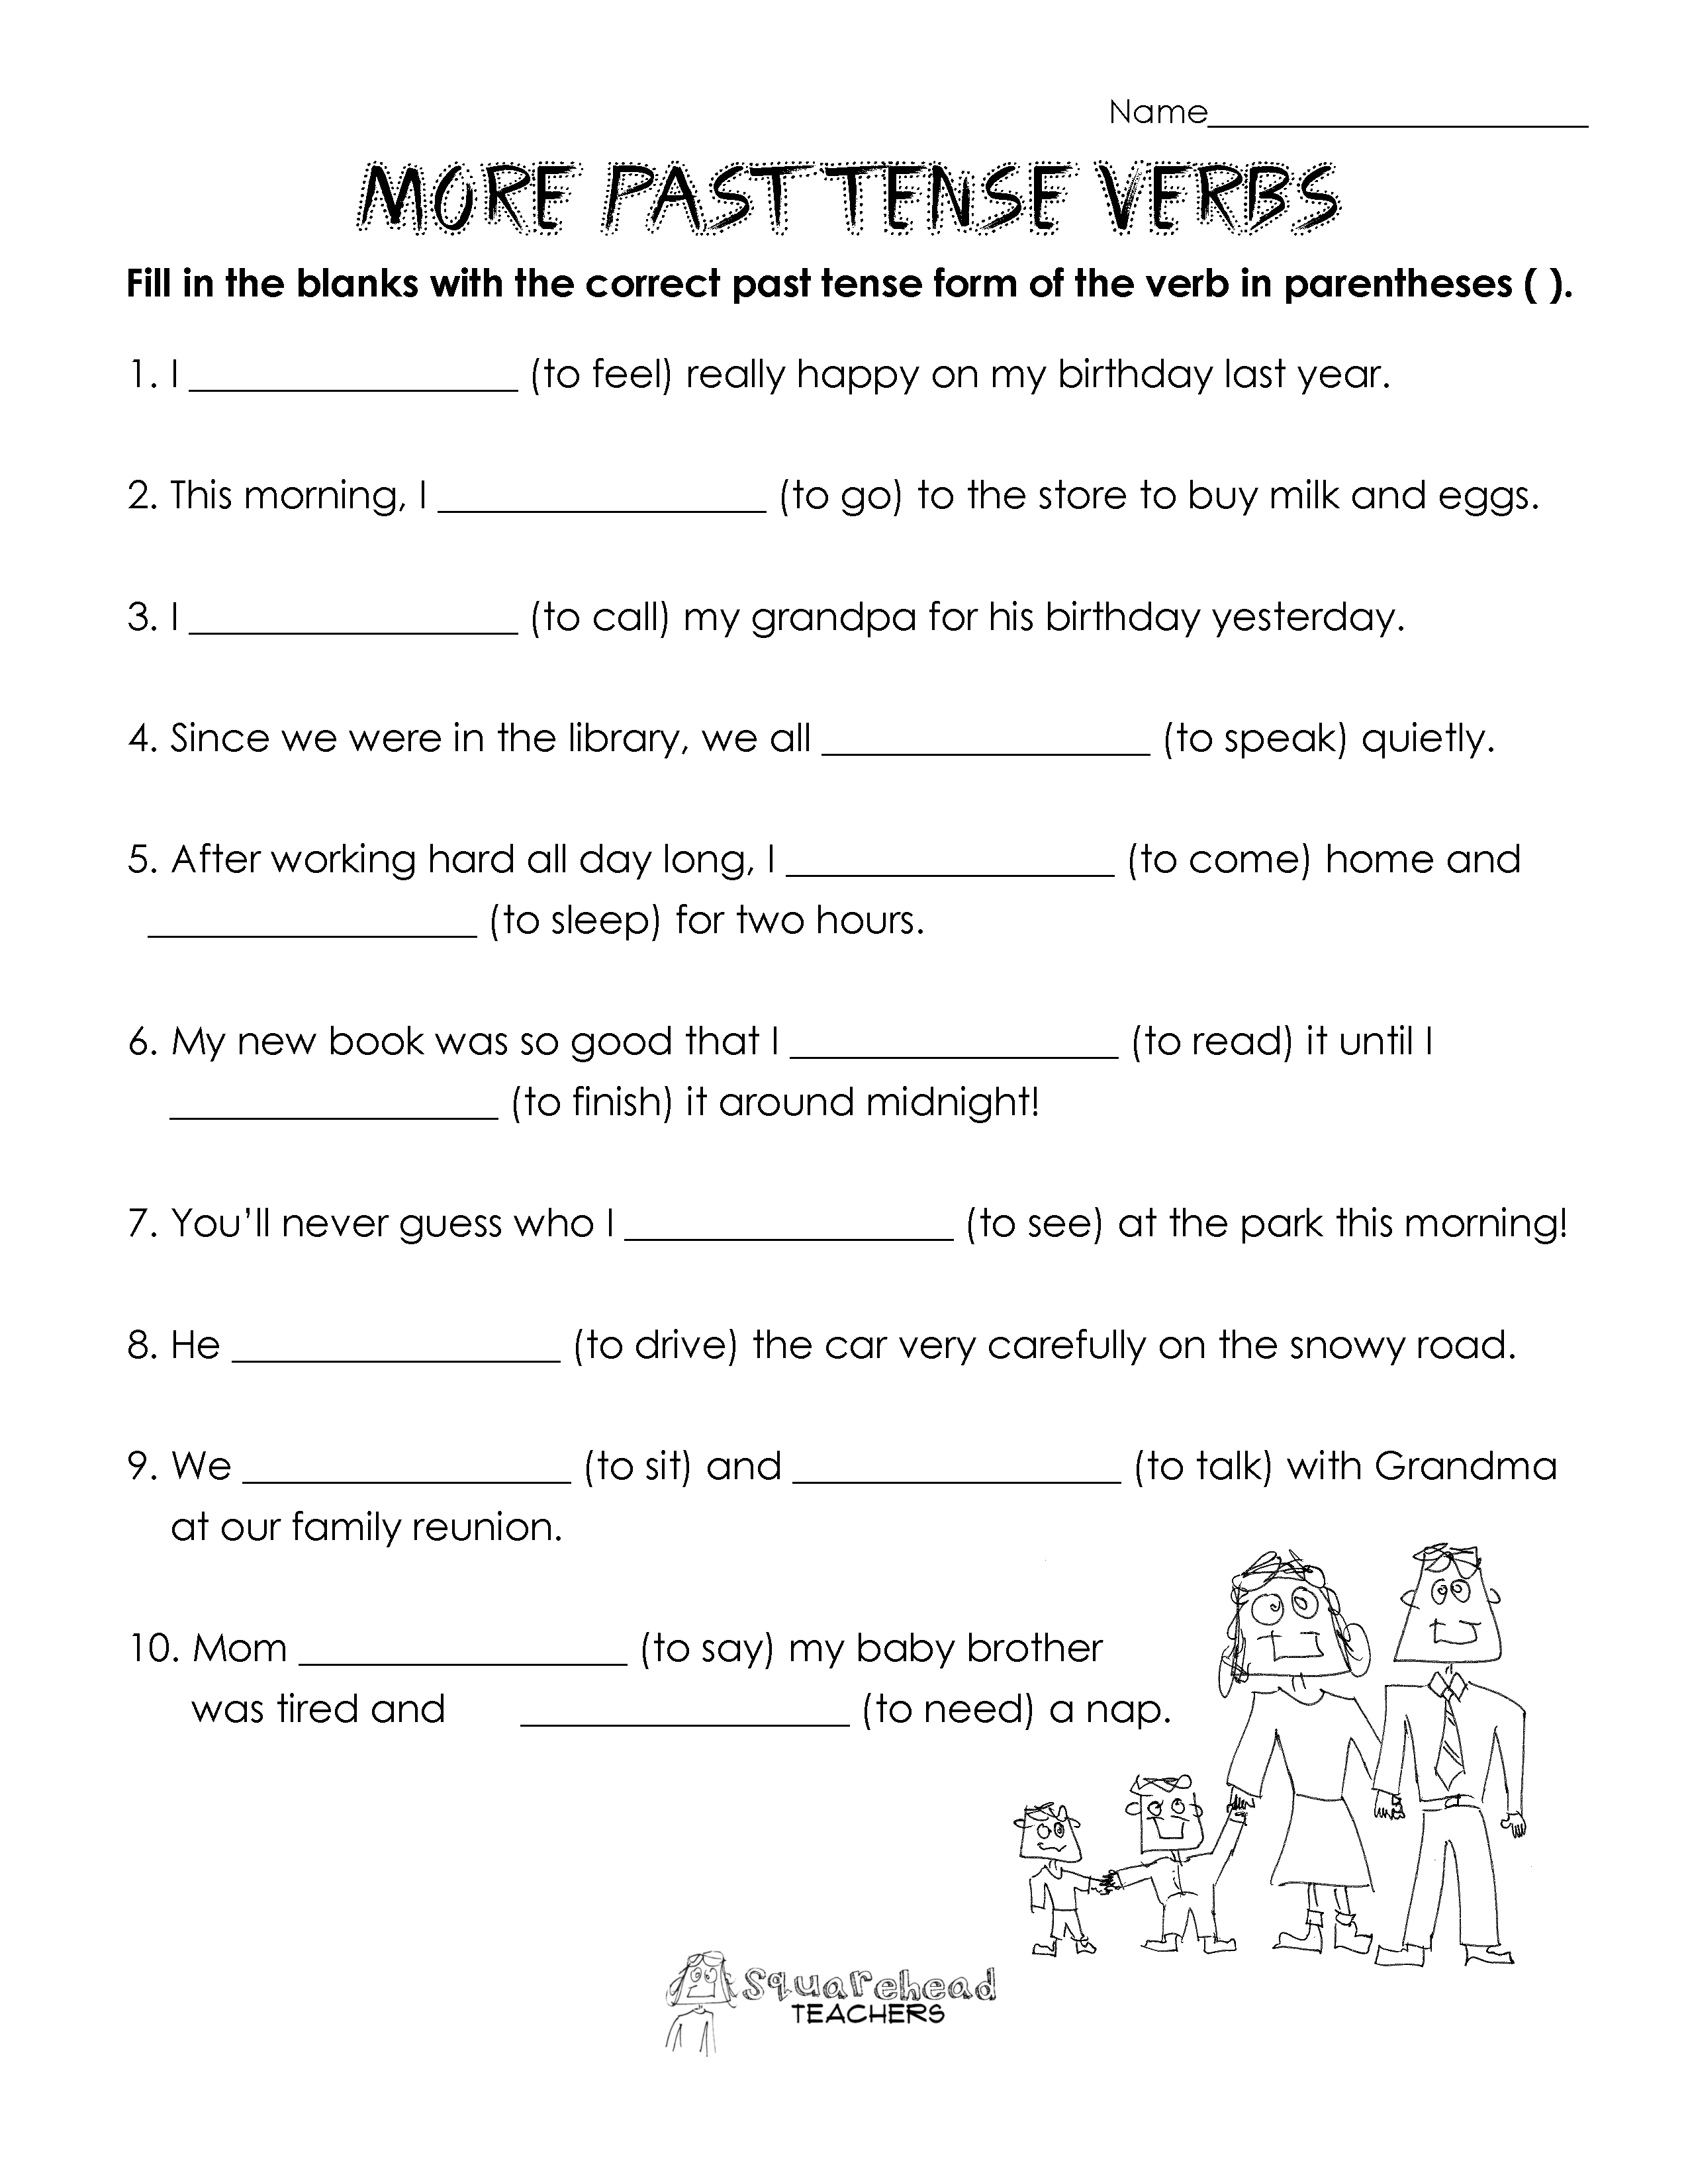 19-best-images-of-past-tense-verbs-worksheets-2nd-grade-cutting-past